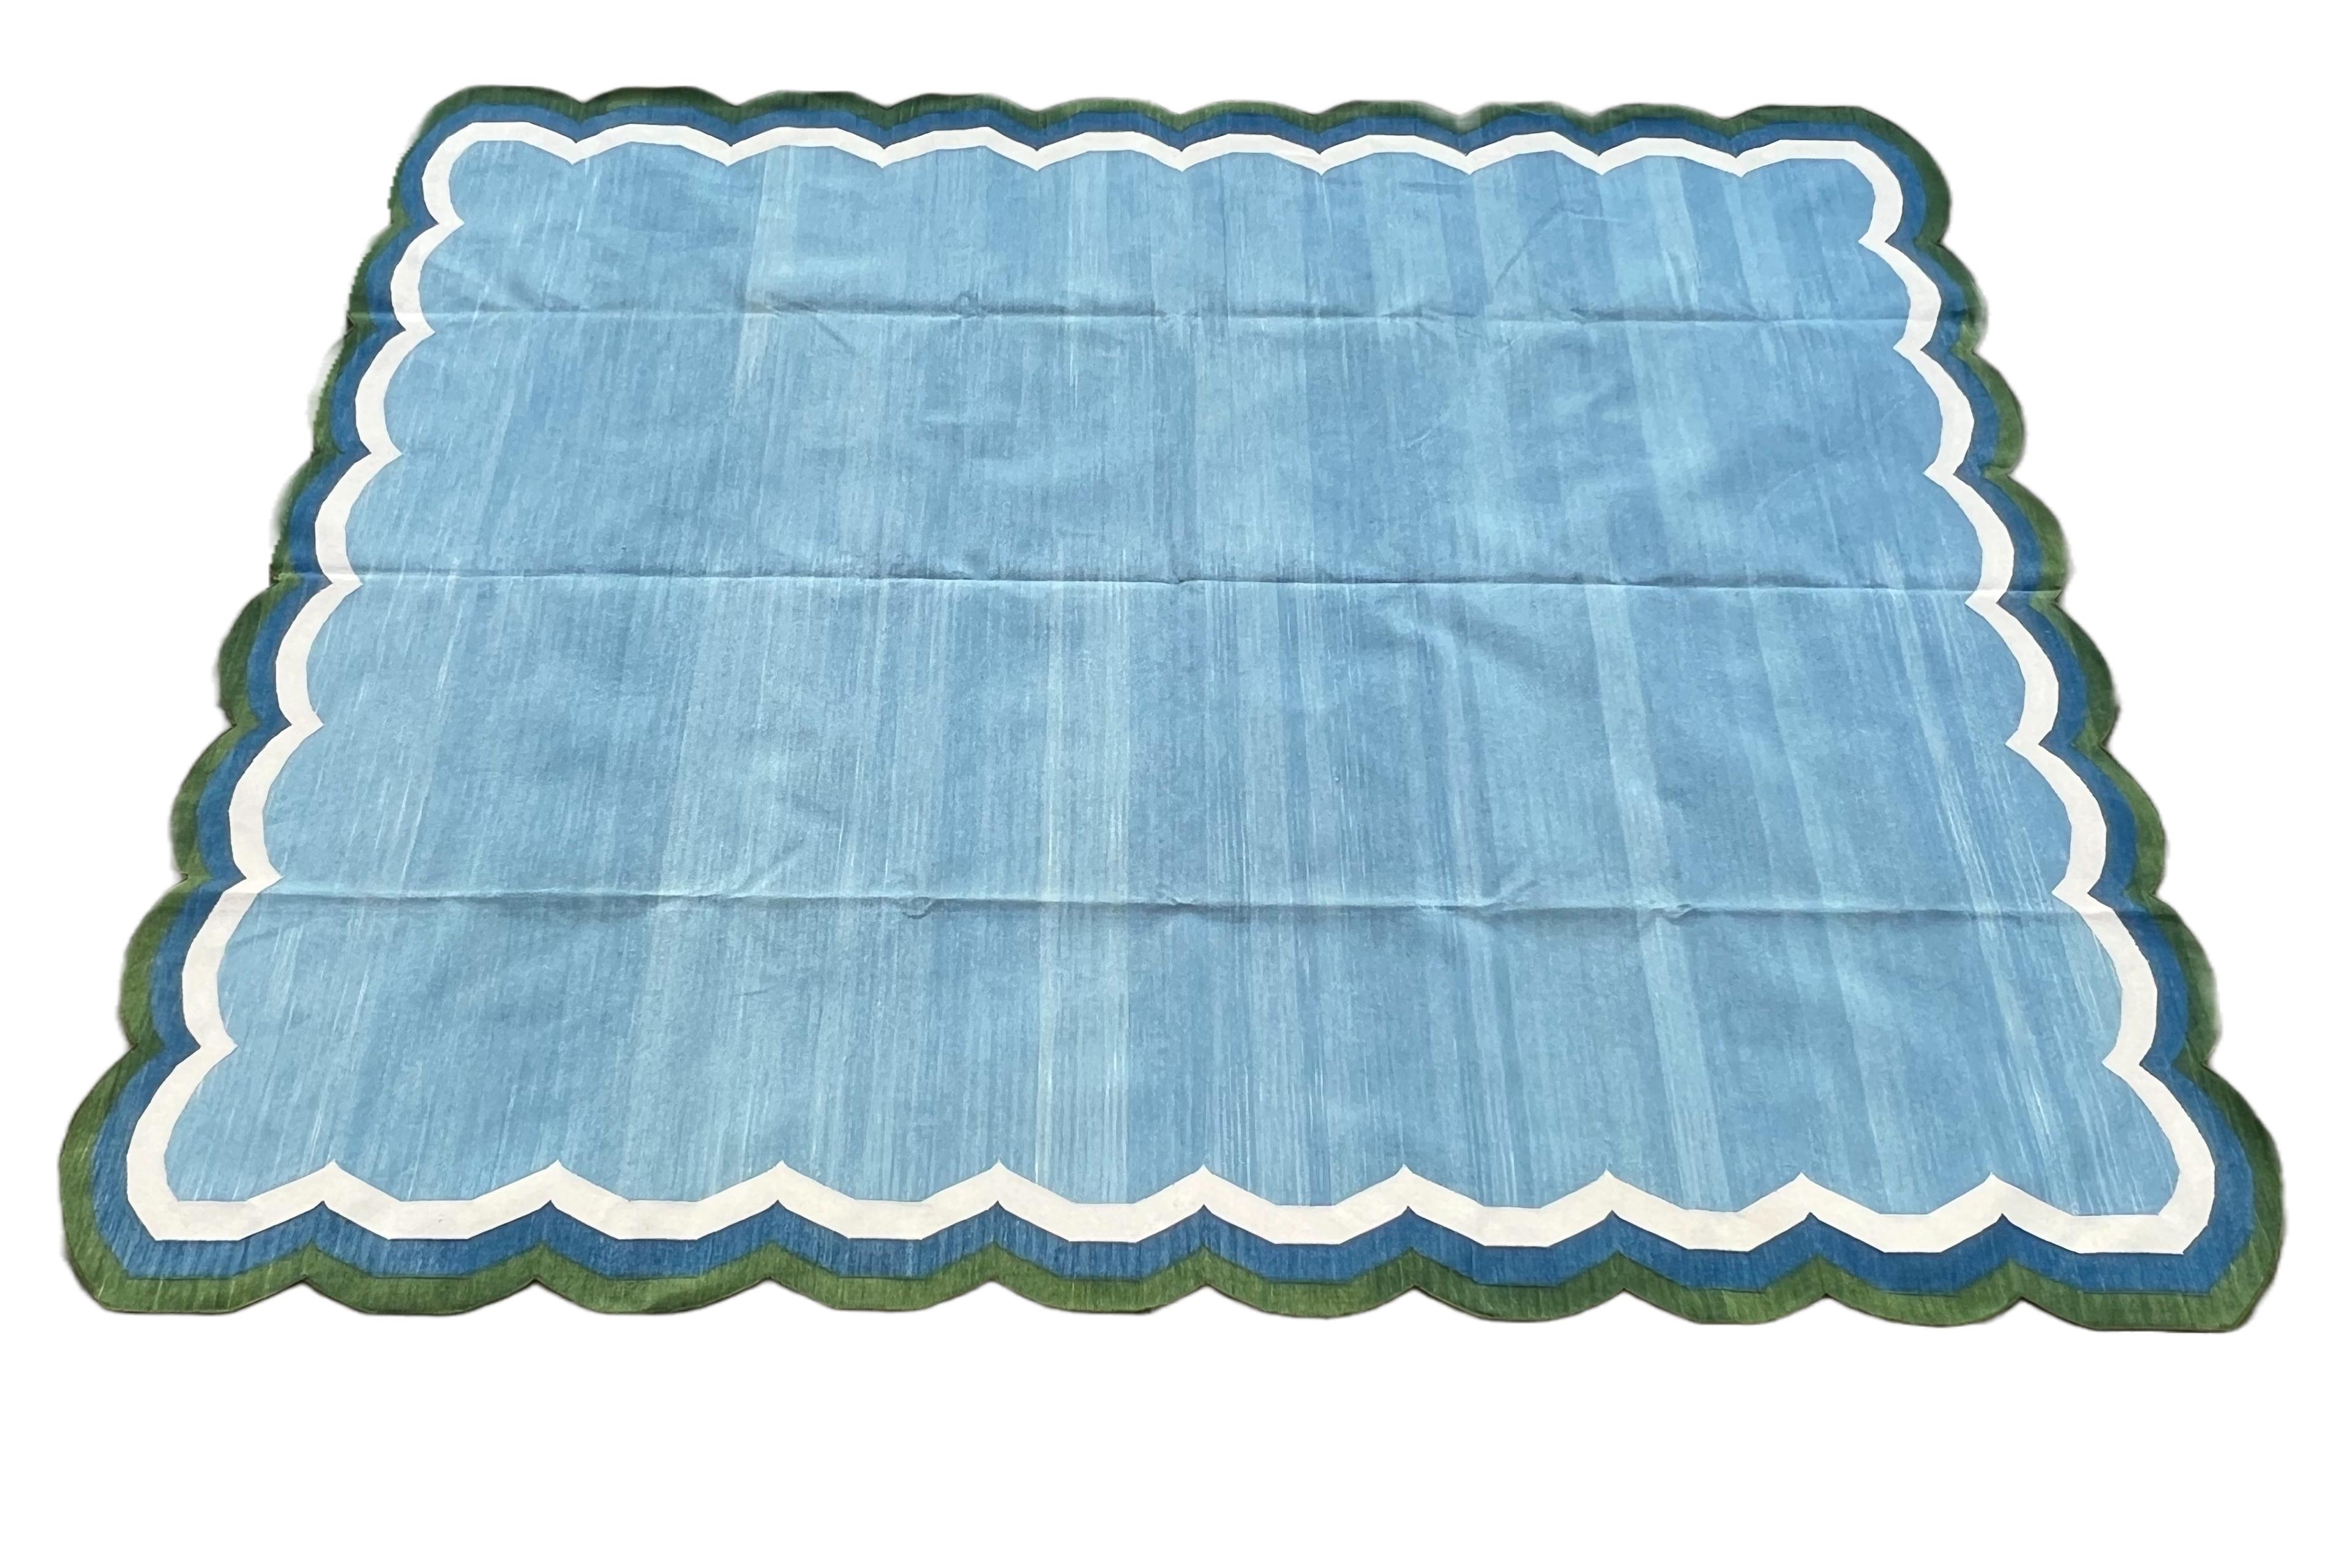 Handmade Cotton Area Flat Weave Rug, 8x10 Blue And Green Scallop Striped Dhurrie For Sale 4